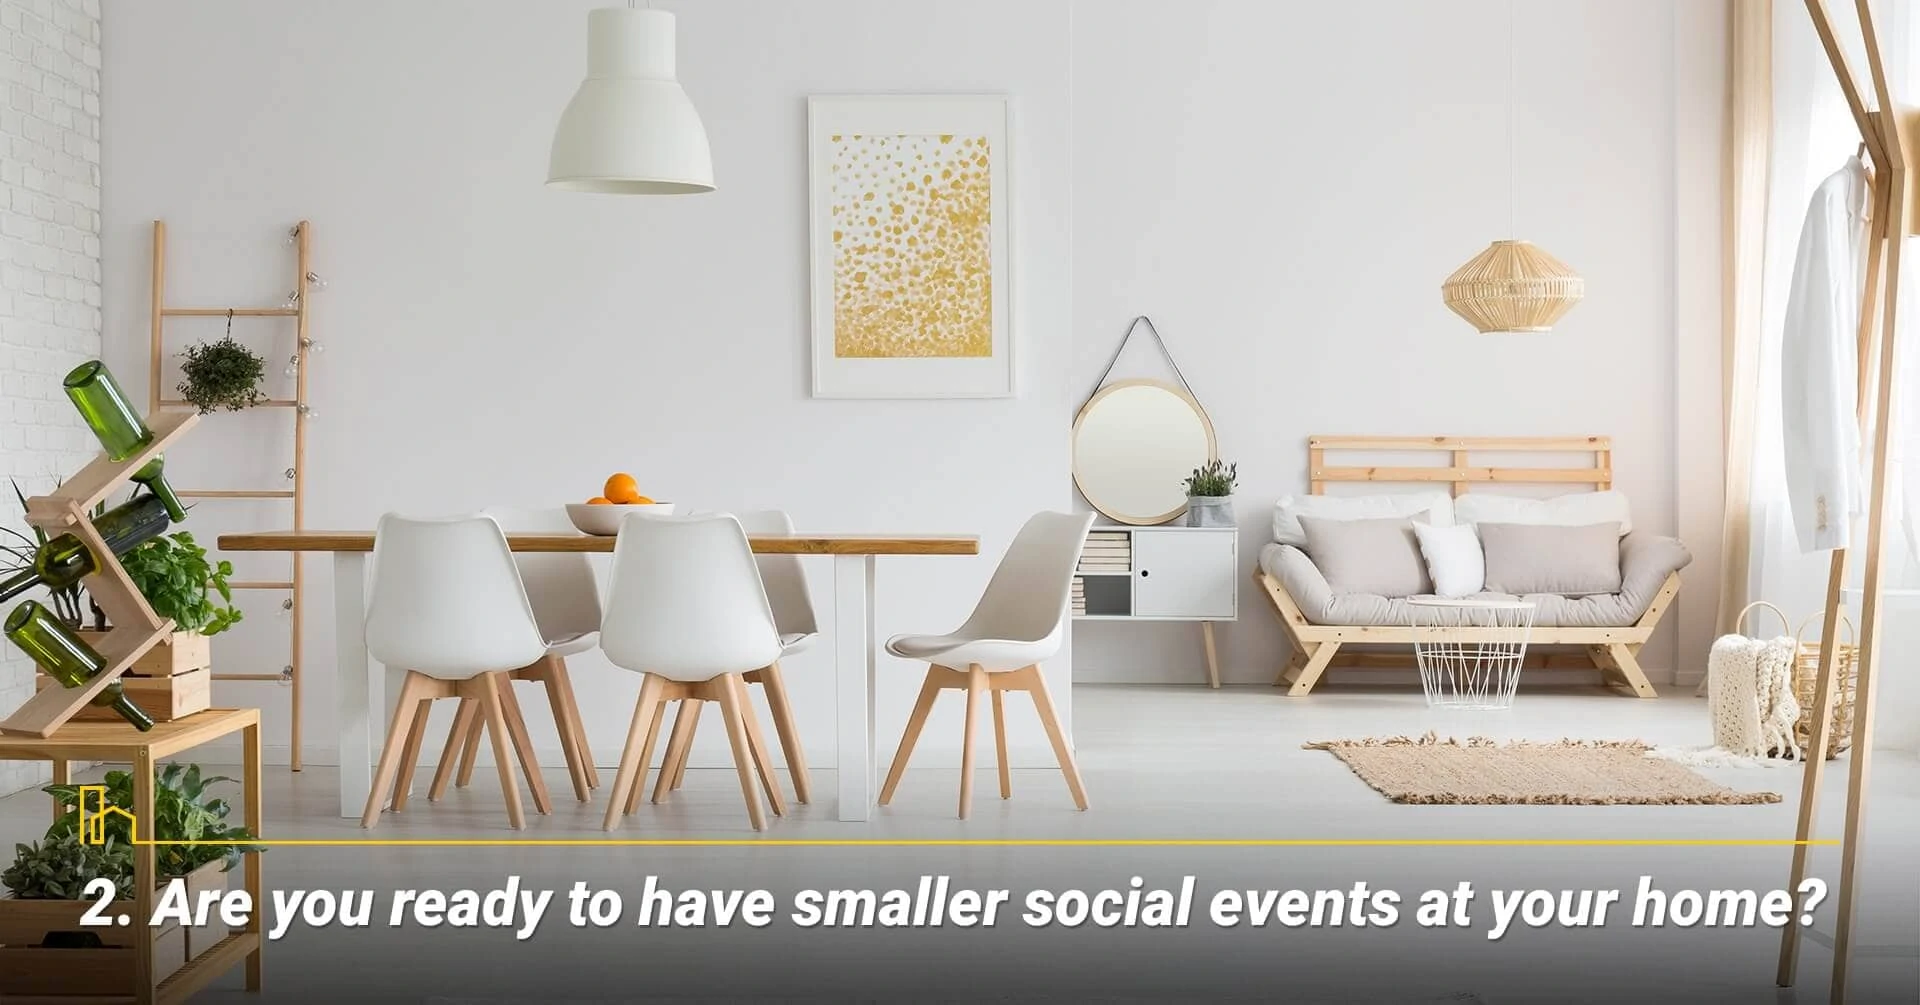 Are you ready to have smaller social events at your home? having fewer guests at your home